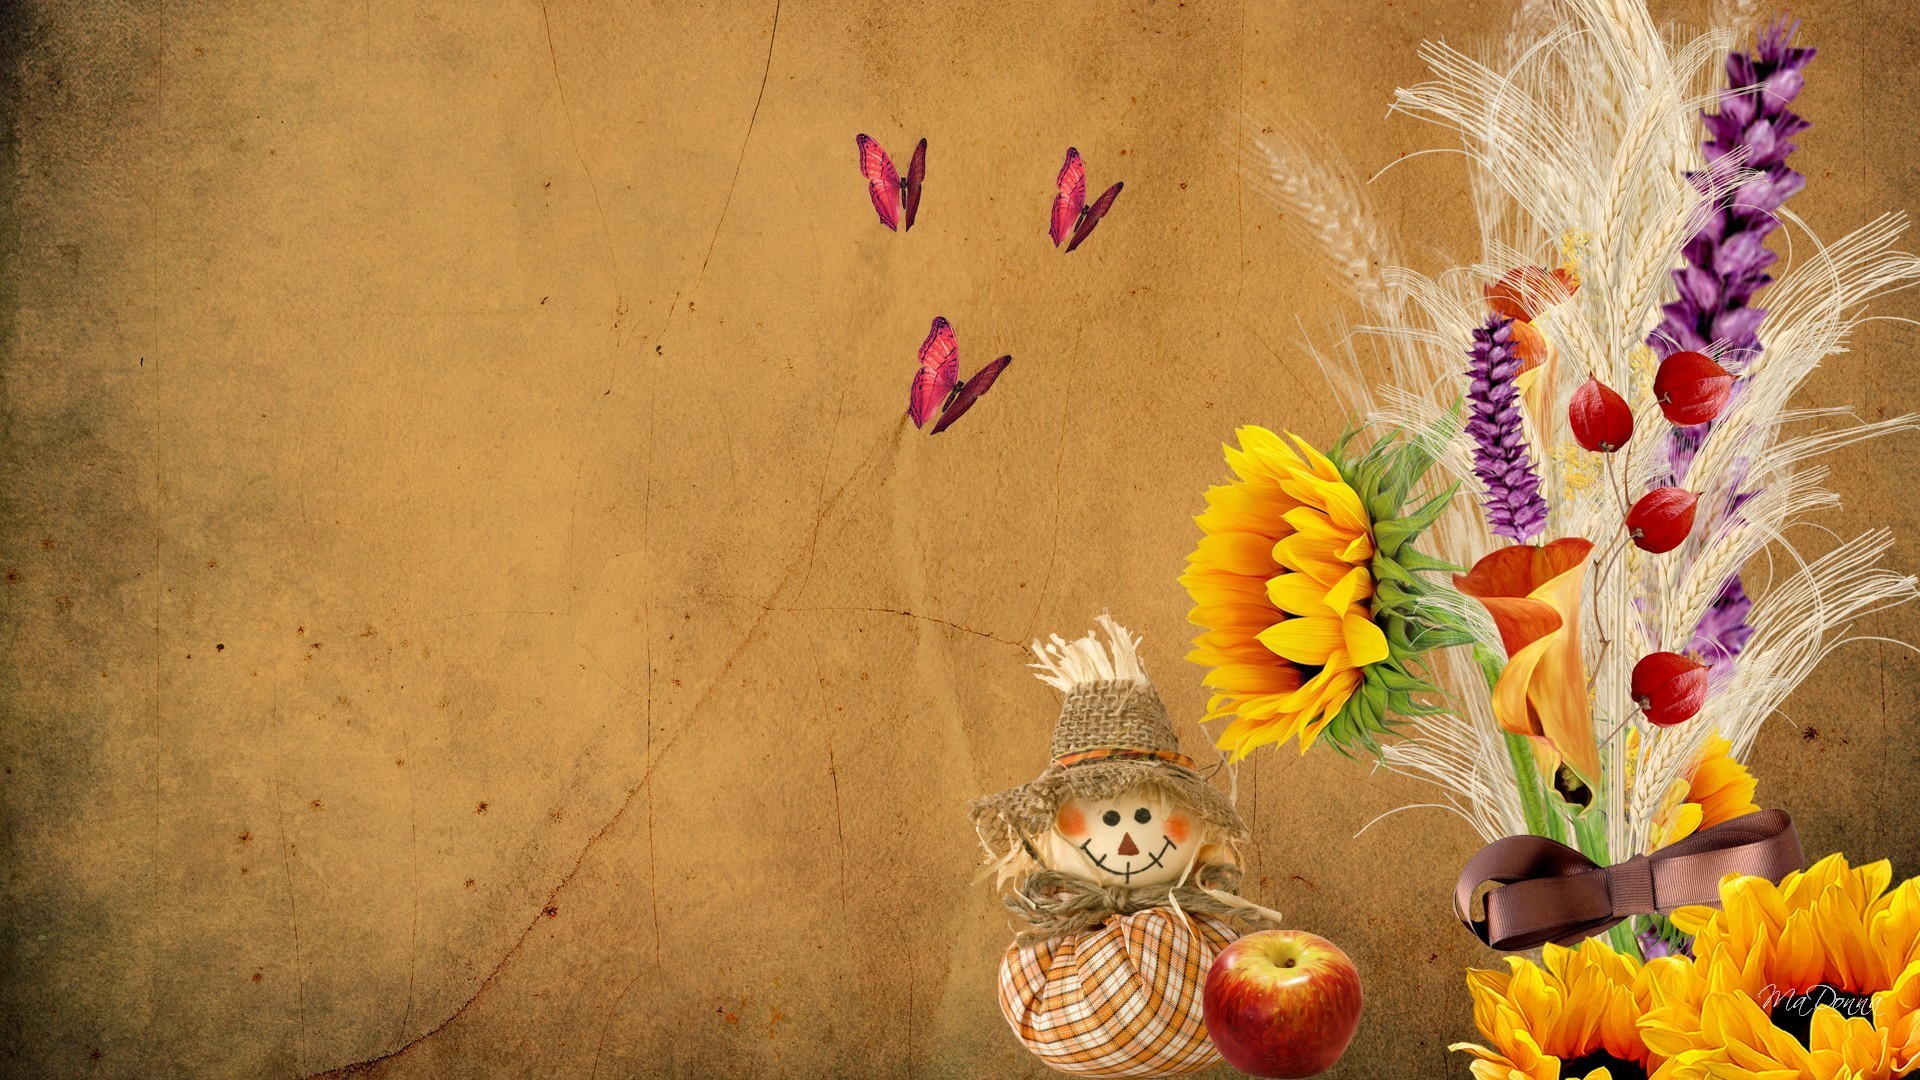 1920x1080 Parchment Tag - Tan Paper Sunflower Autumn Bow Parchment Ribbon Doll Apple  Wheat Seeds Fall Scare